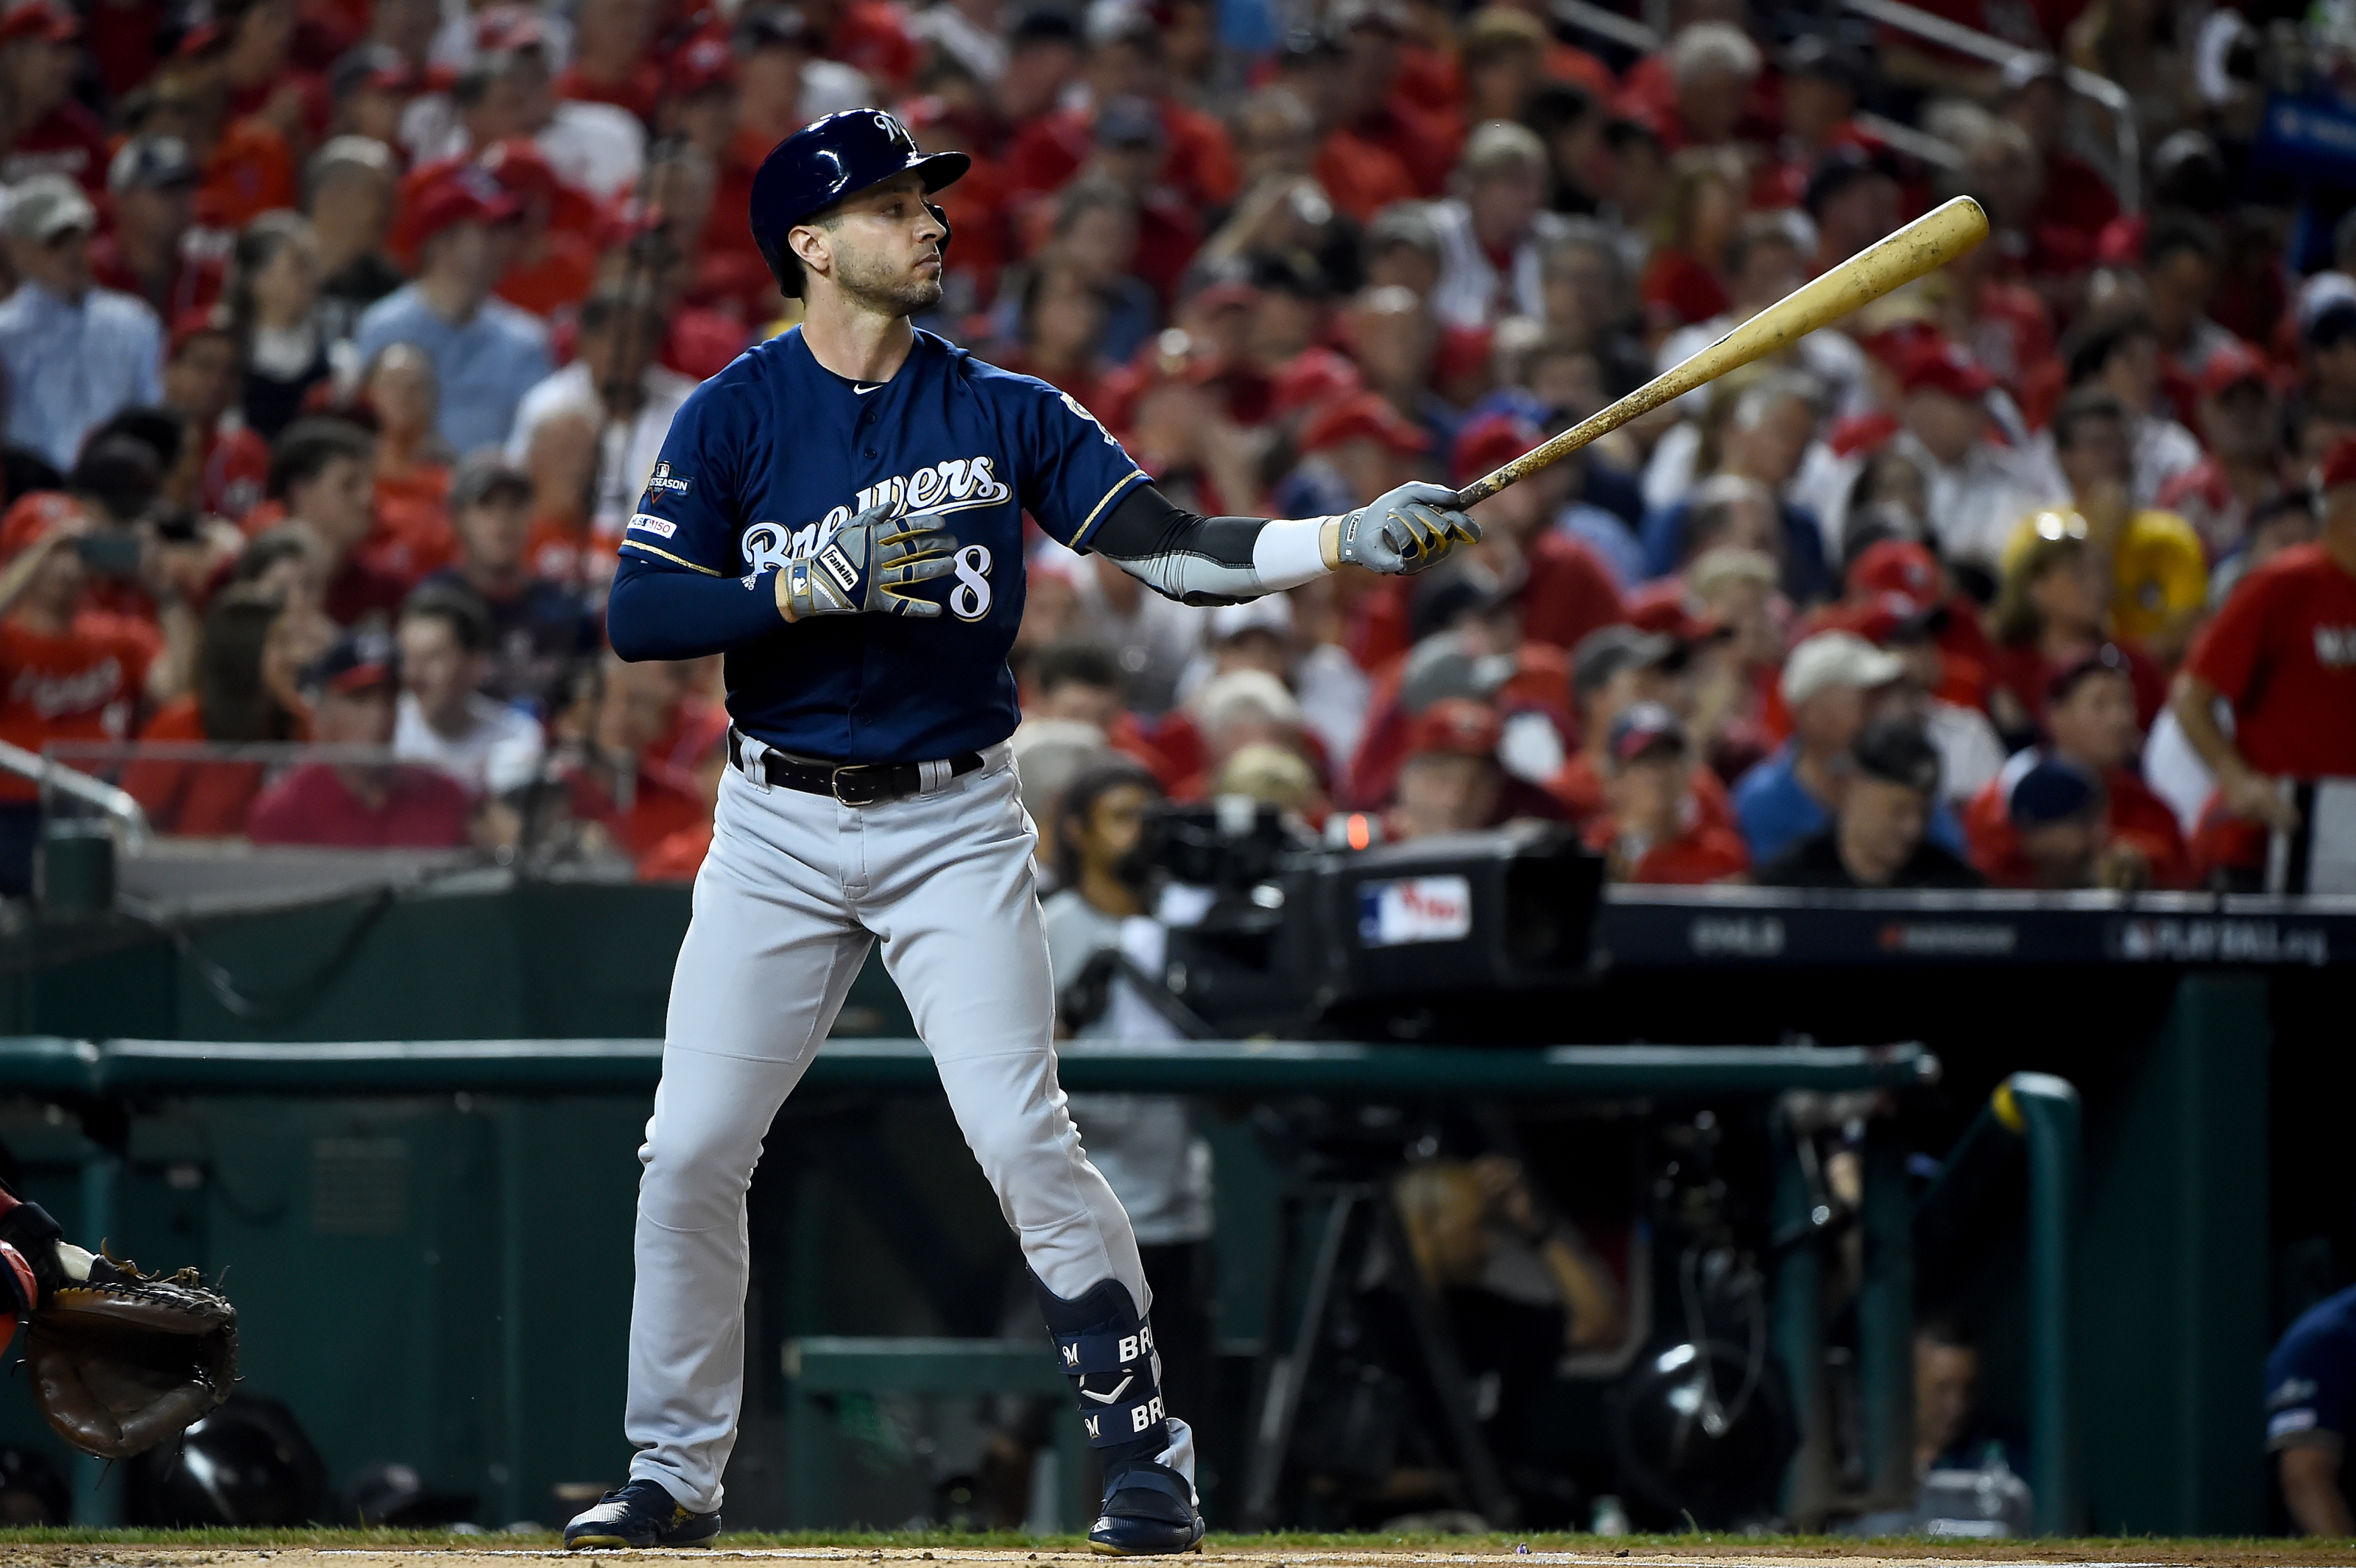 Ryan Braun discussed 'multiple times' returning to Brewers in 2021